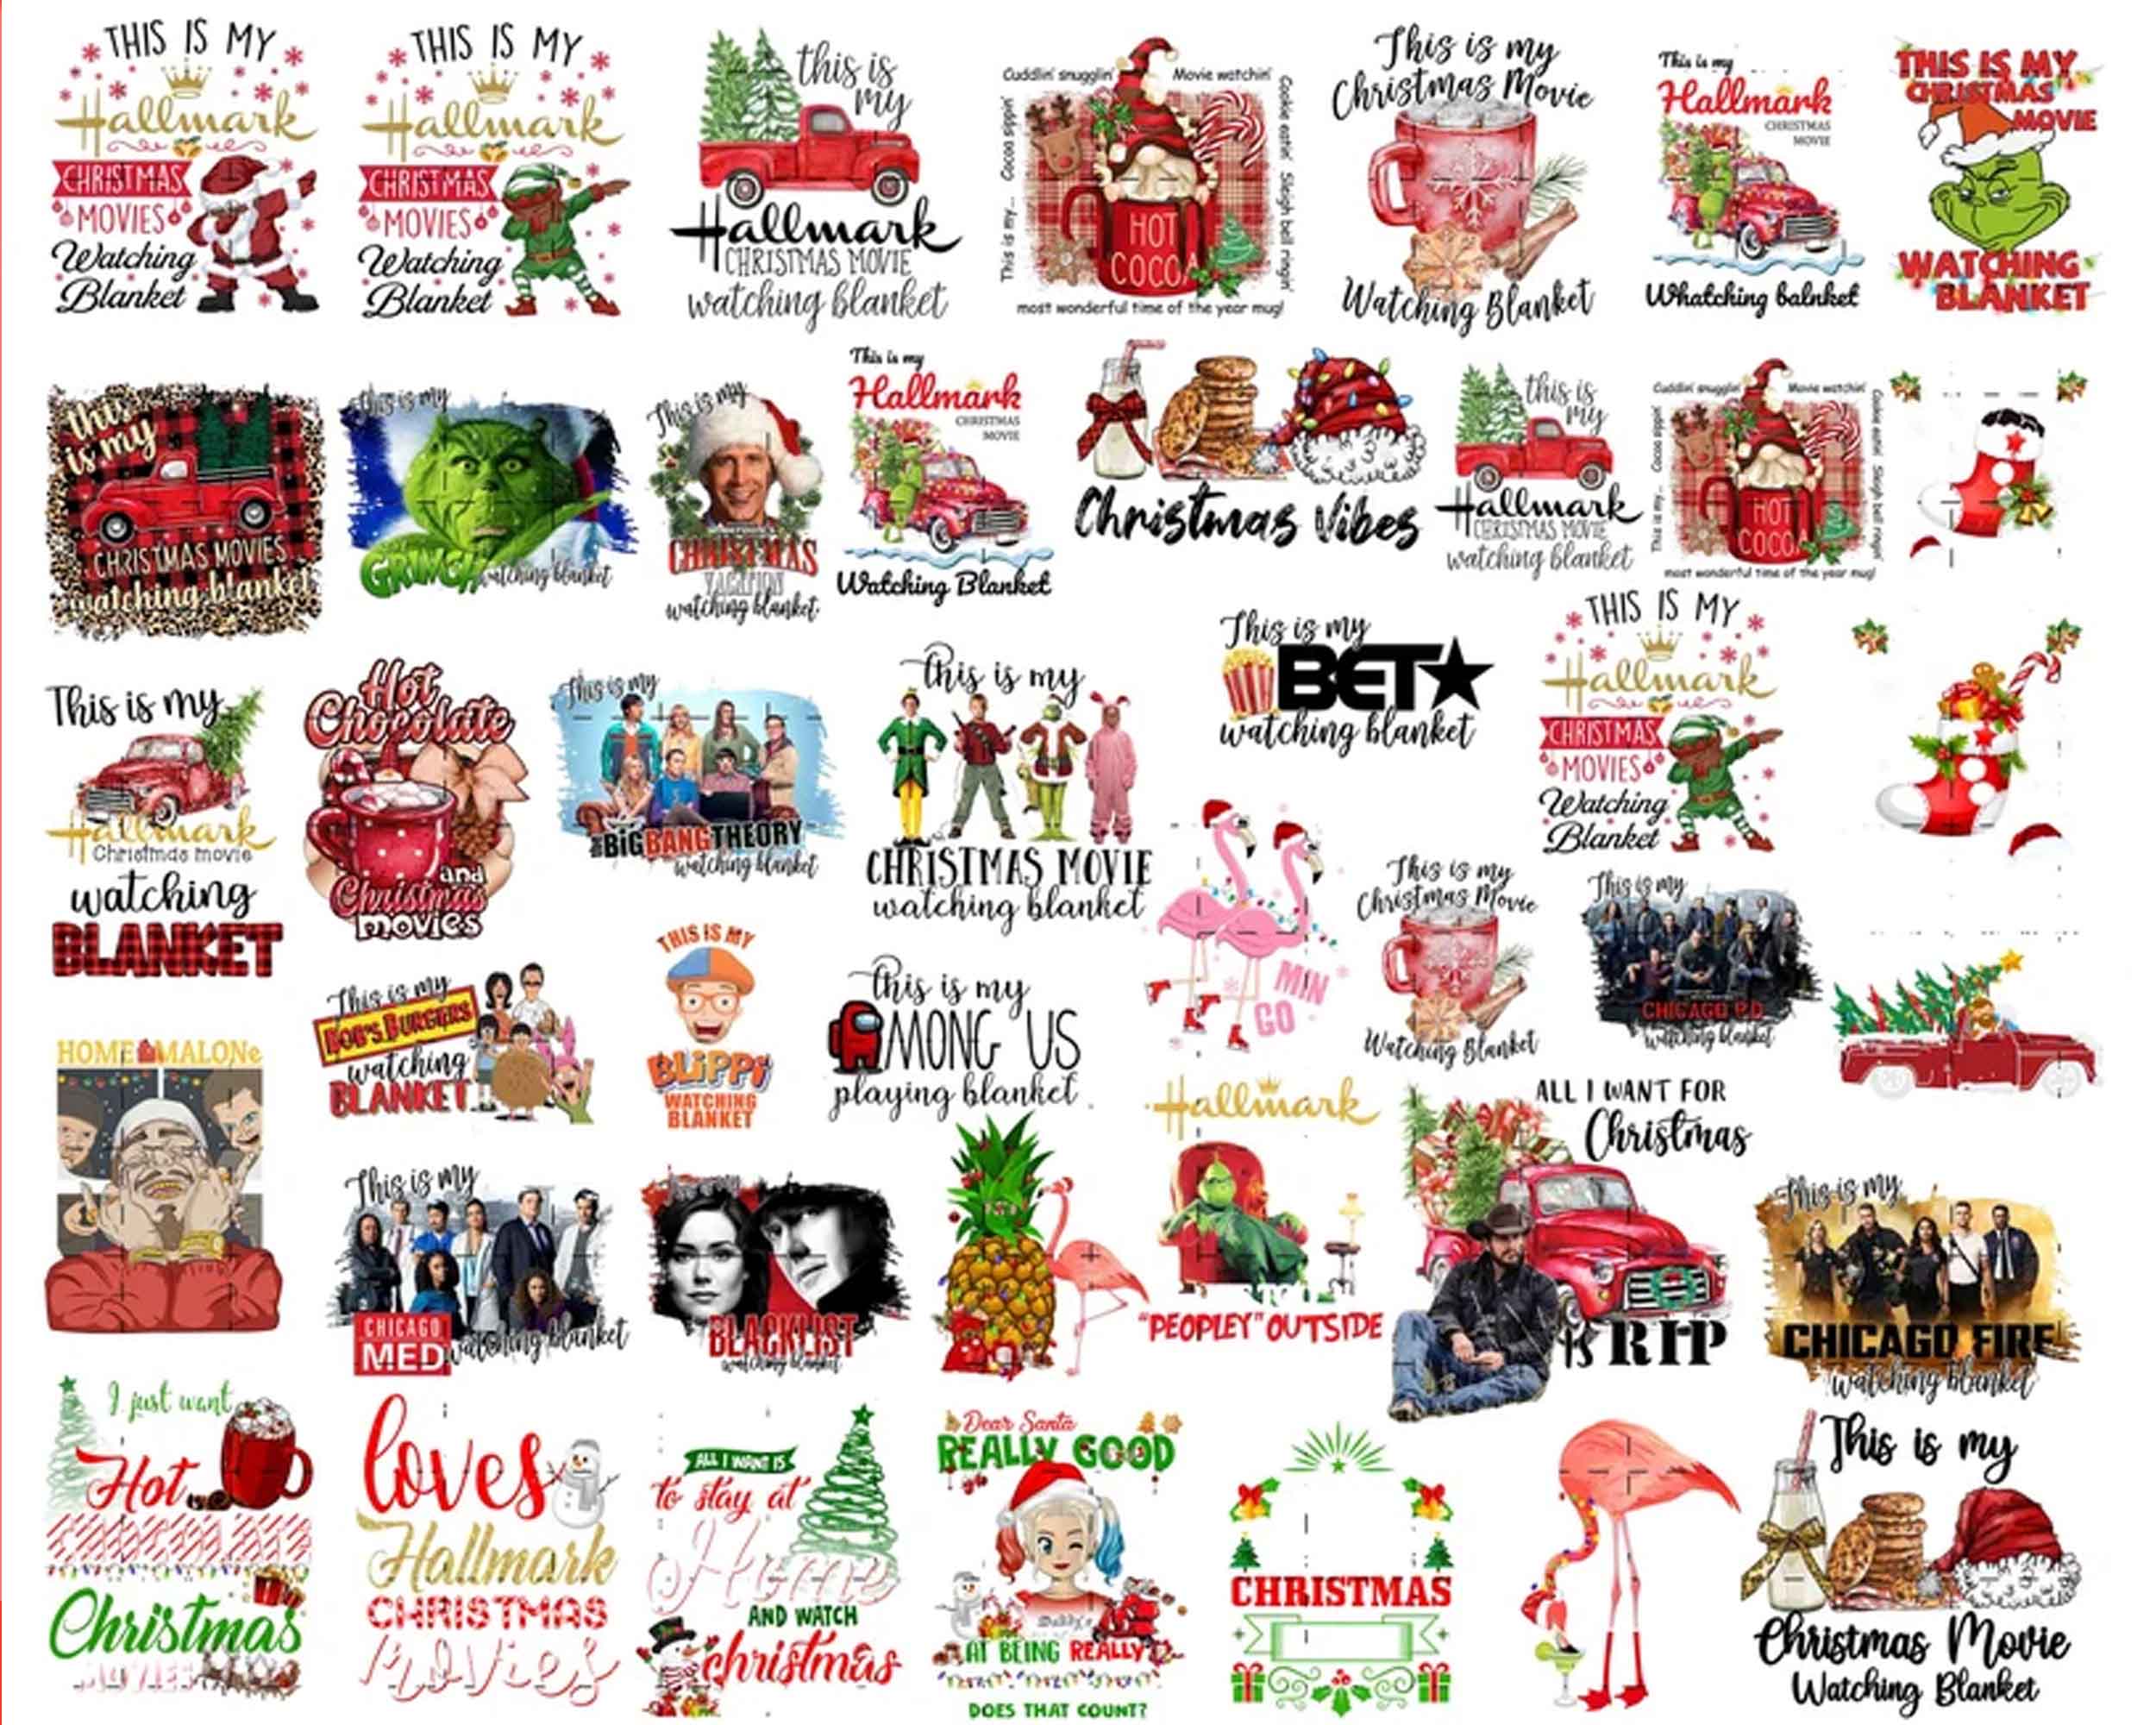 85+ Christmas Movie Watching Blanket PNG | Sublimation File | Christmas Movies PNG | Digital files CRM29112210